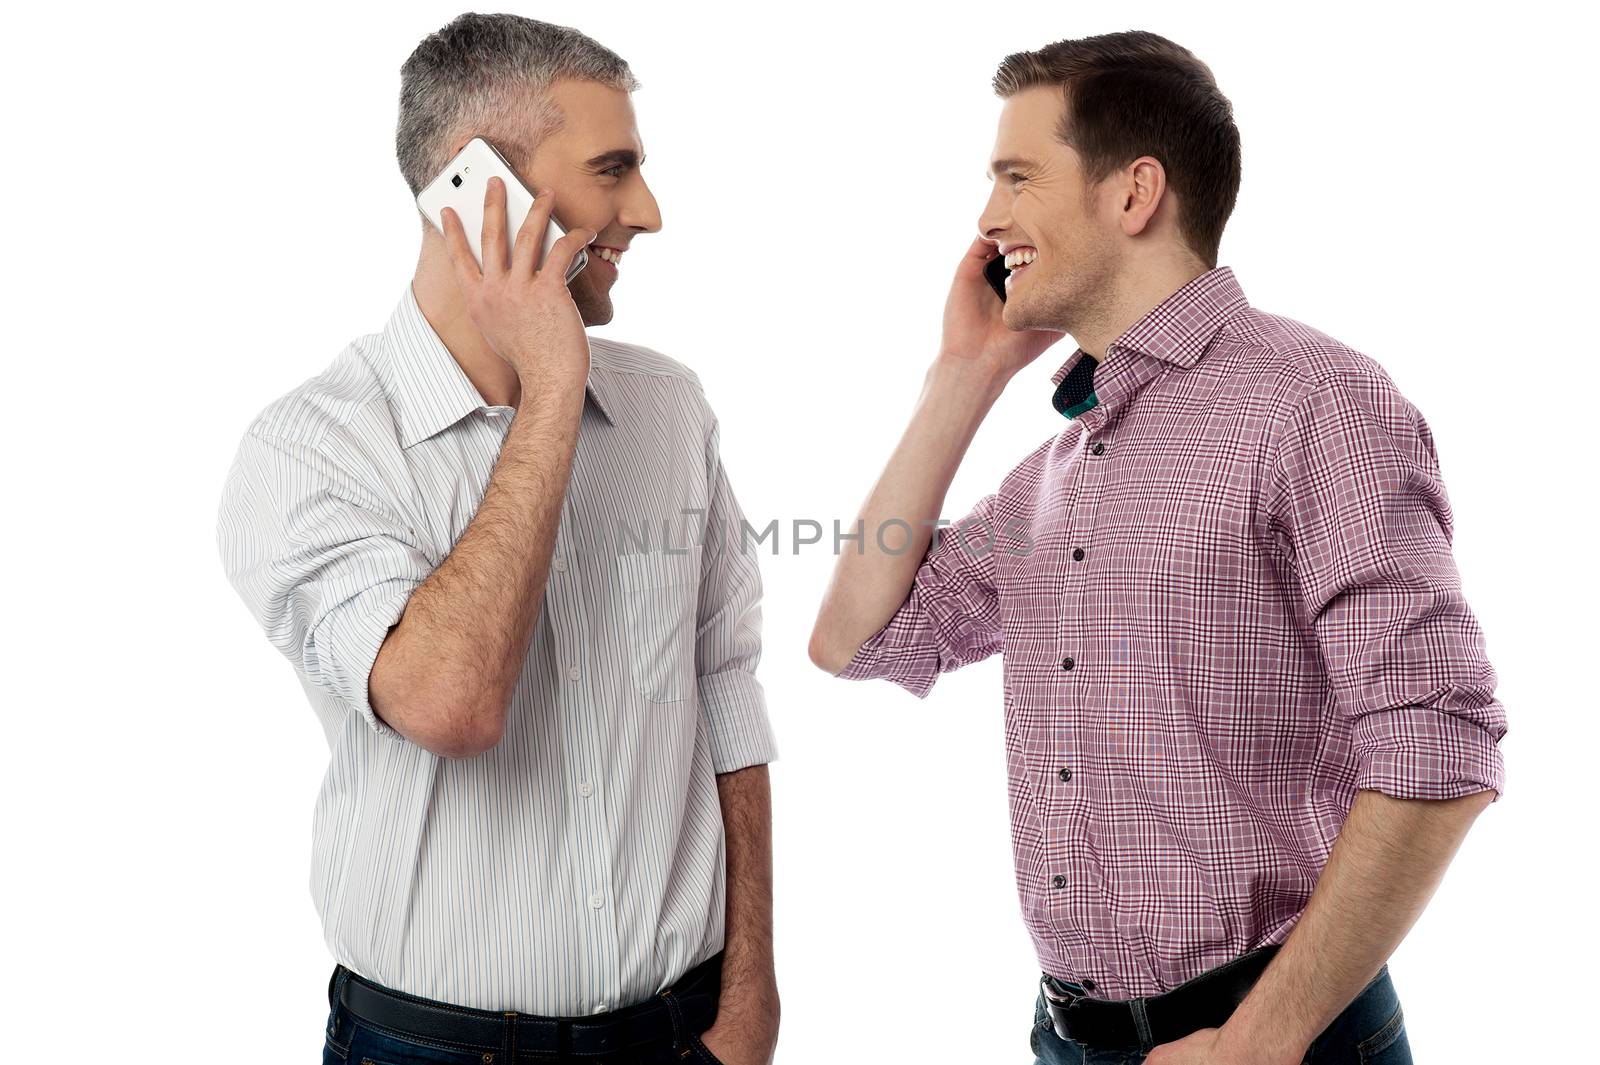 Two young friends happily talking on mobile phone